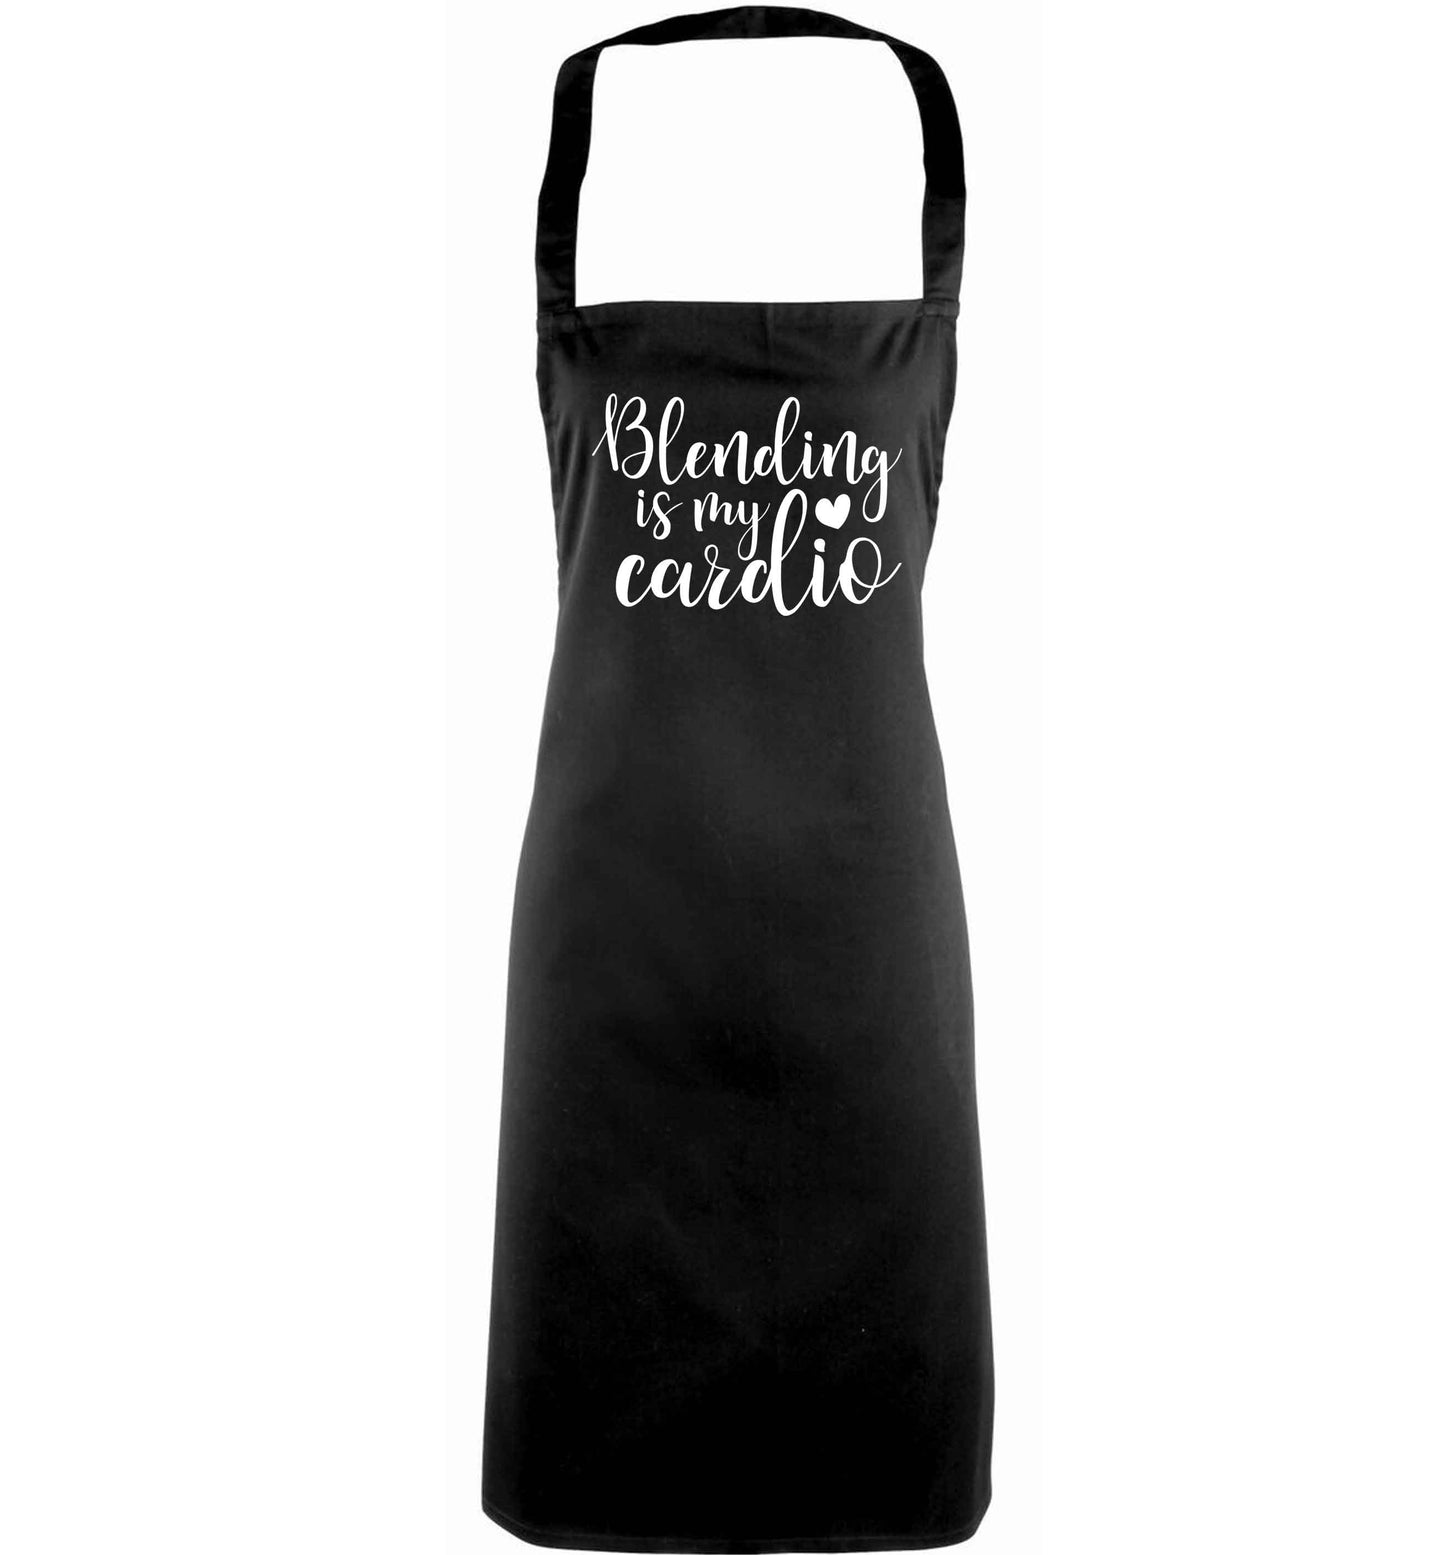 Blending is my cardio adults black apron